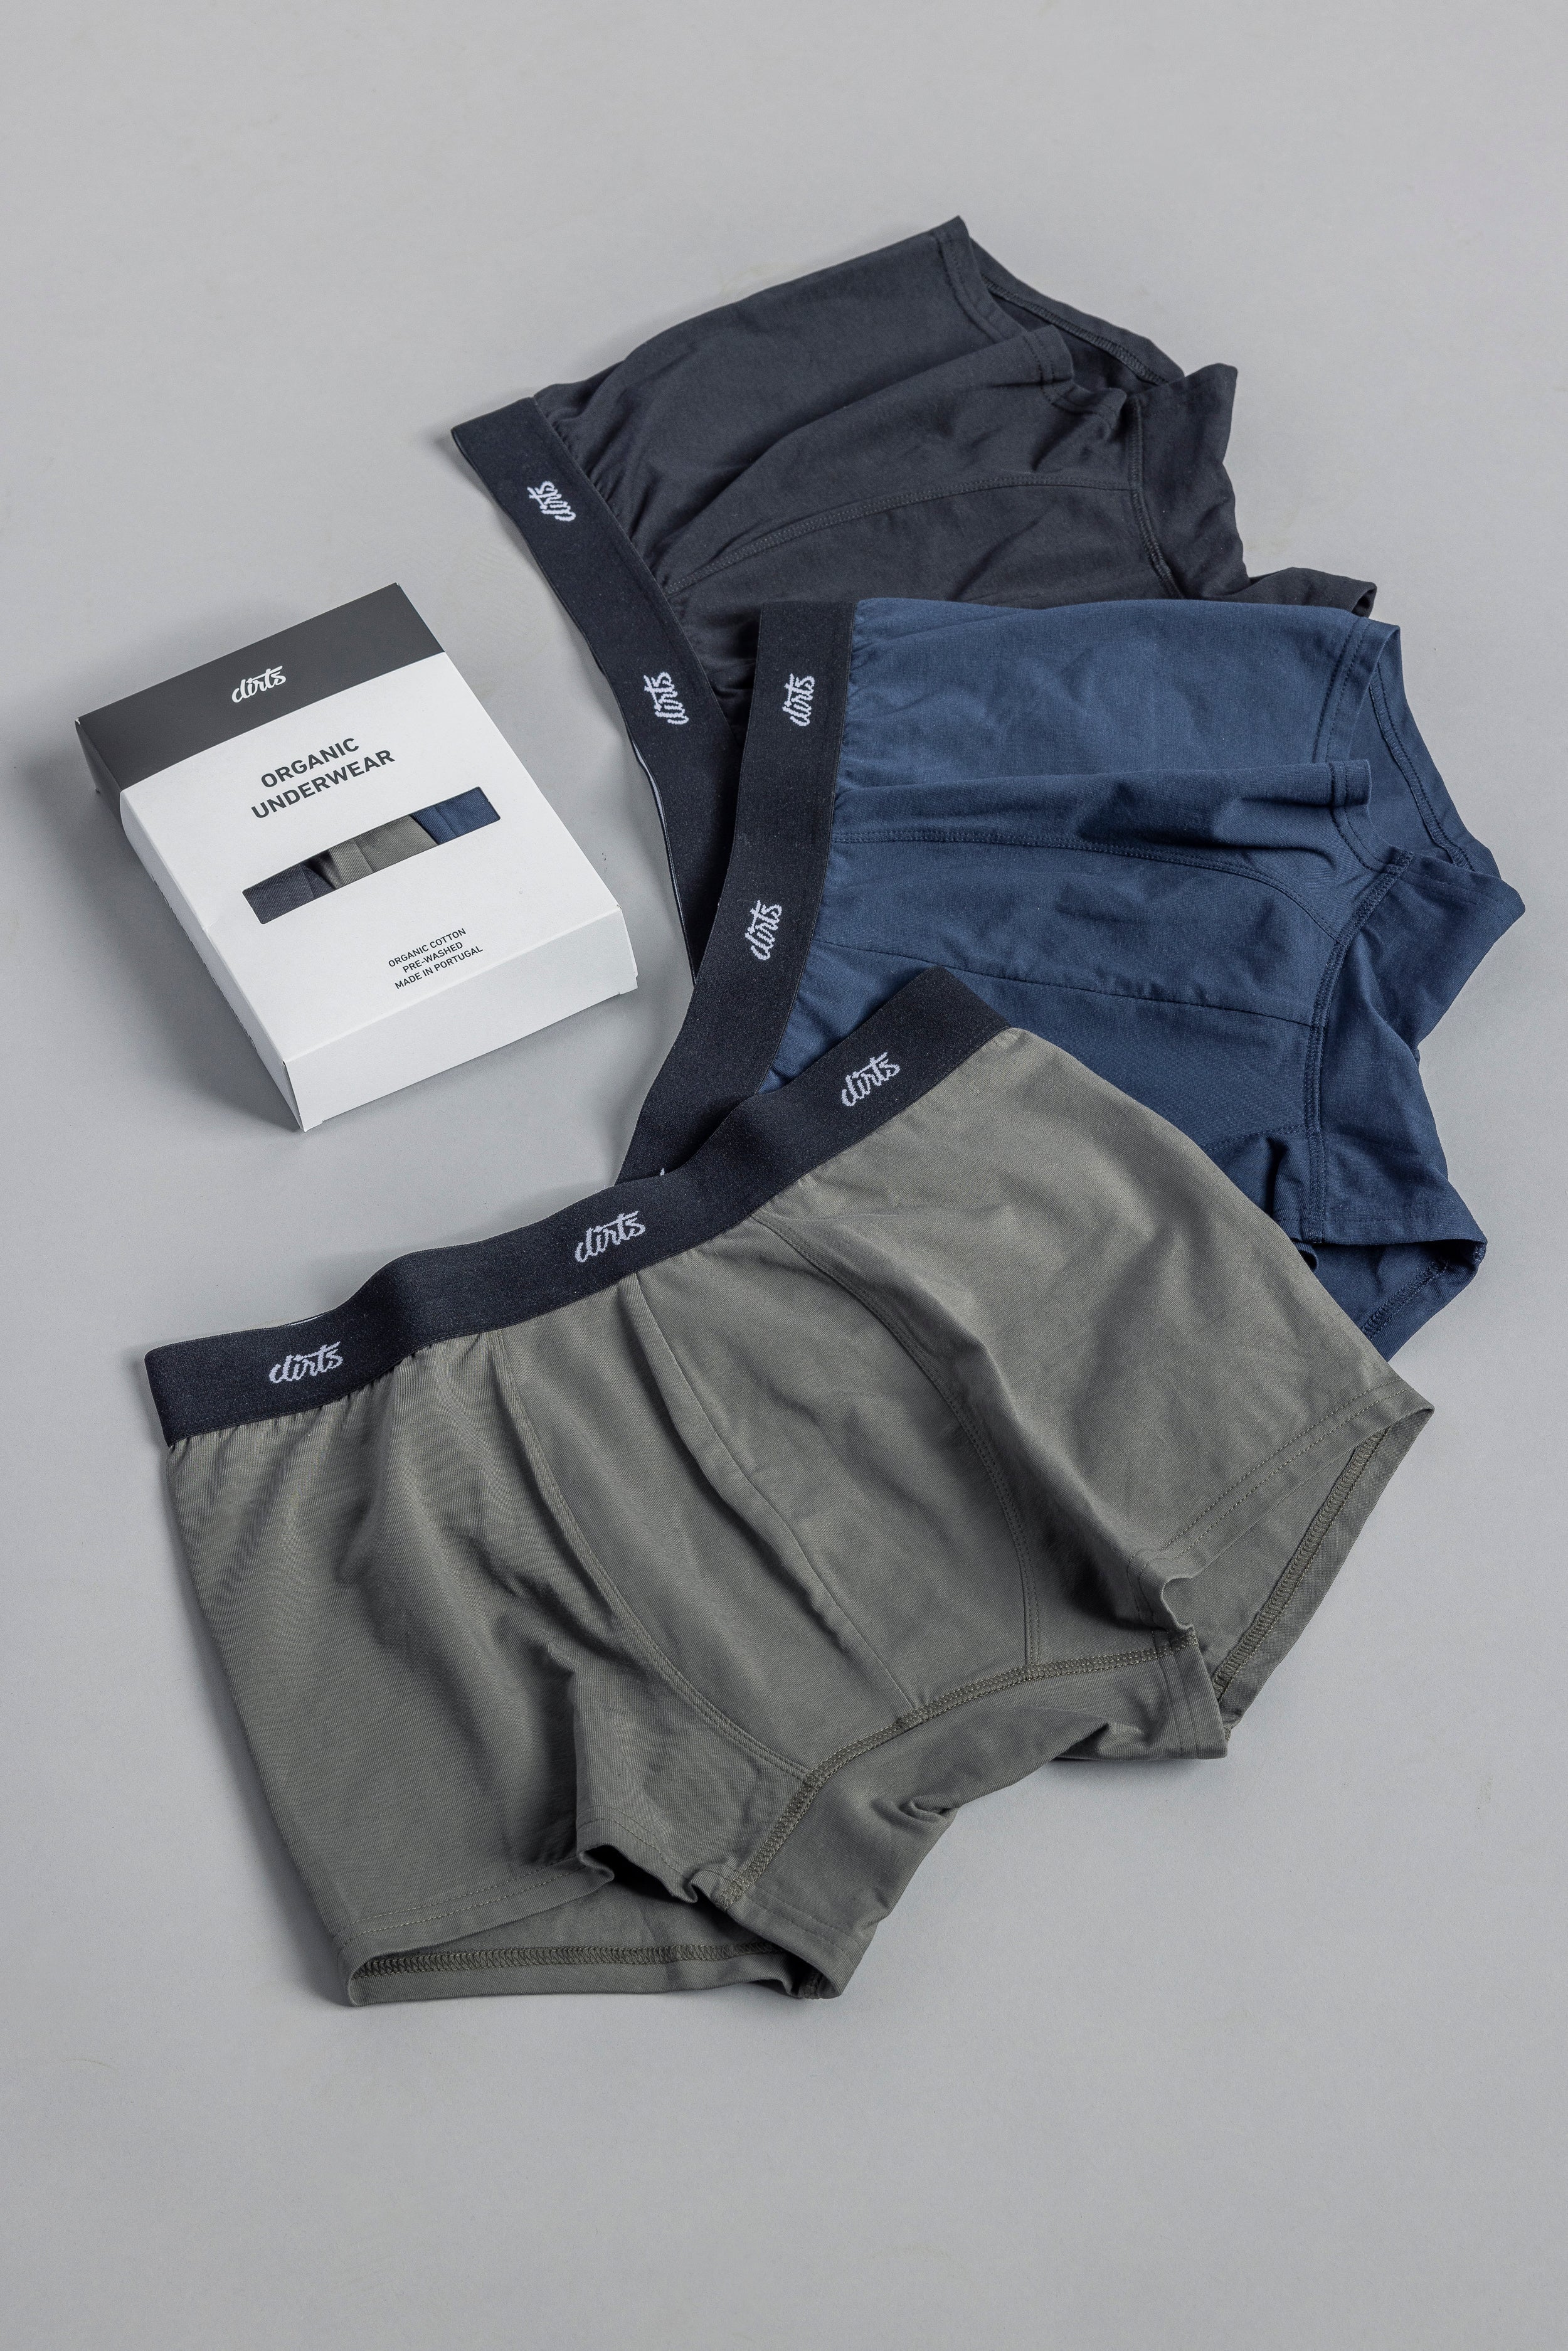 Boxer shorts 3-pack made of organic cotton from DIRTS